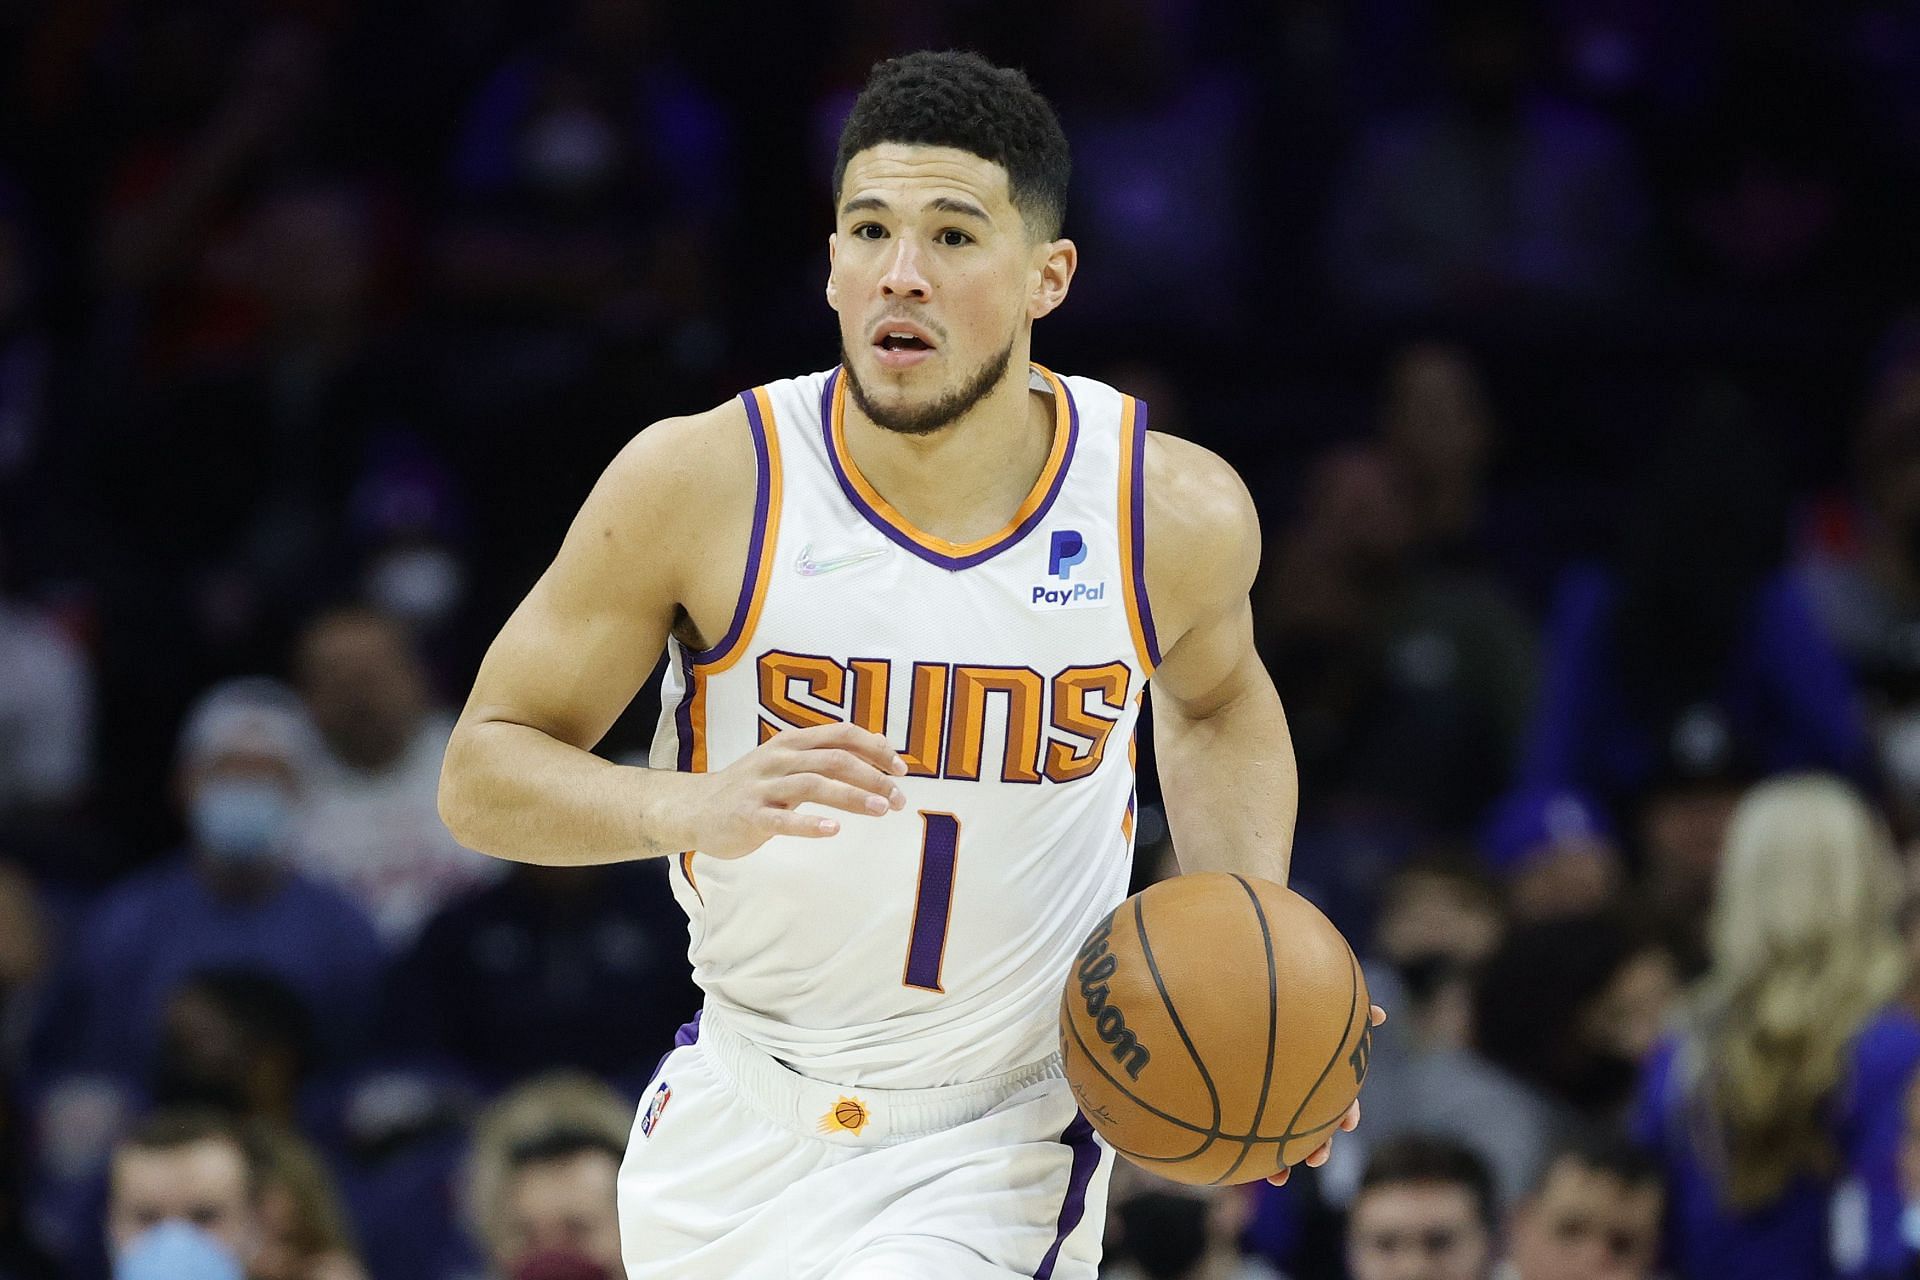 Devin Booker dropped a season-high 49 points versus the Denver Nuggets on Thursday